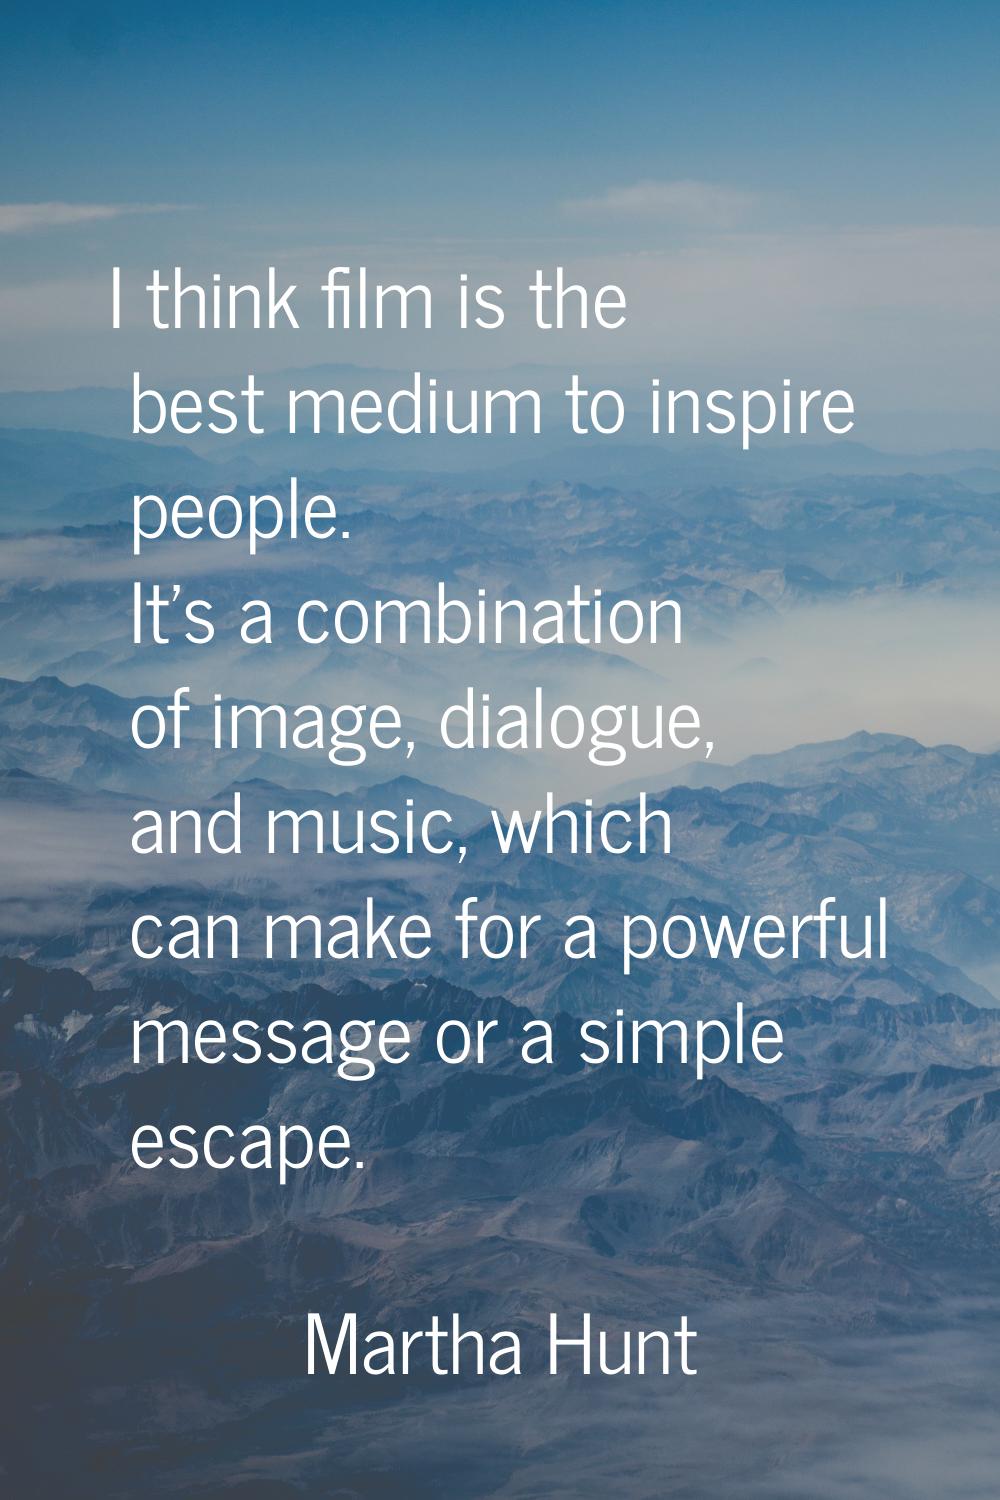 I think film is the best medium to inspire people. It's a combination of image, dialogue, and music